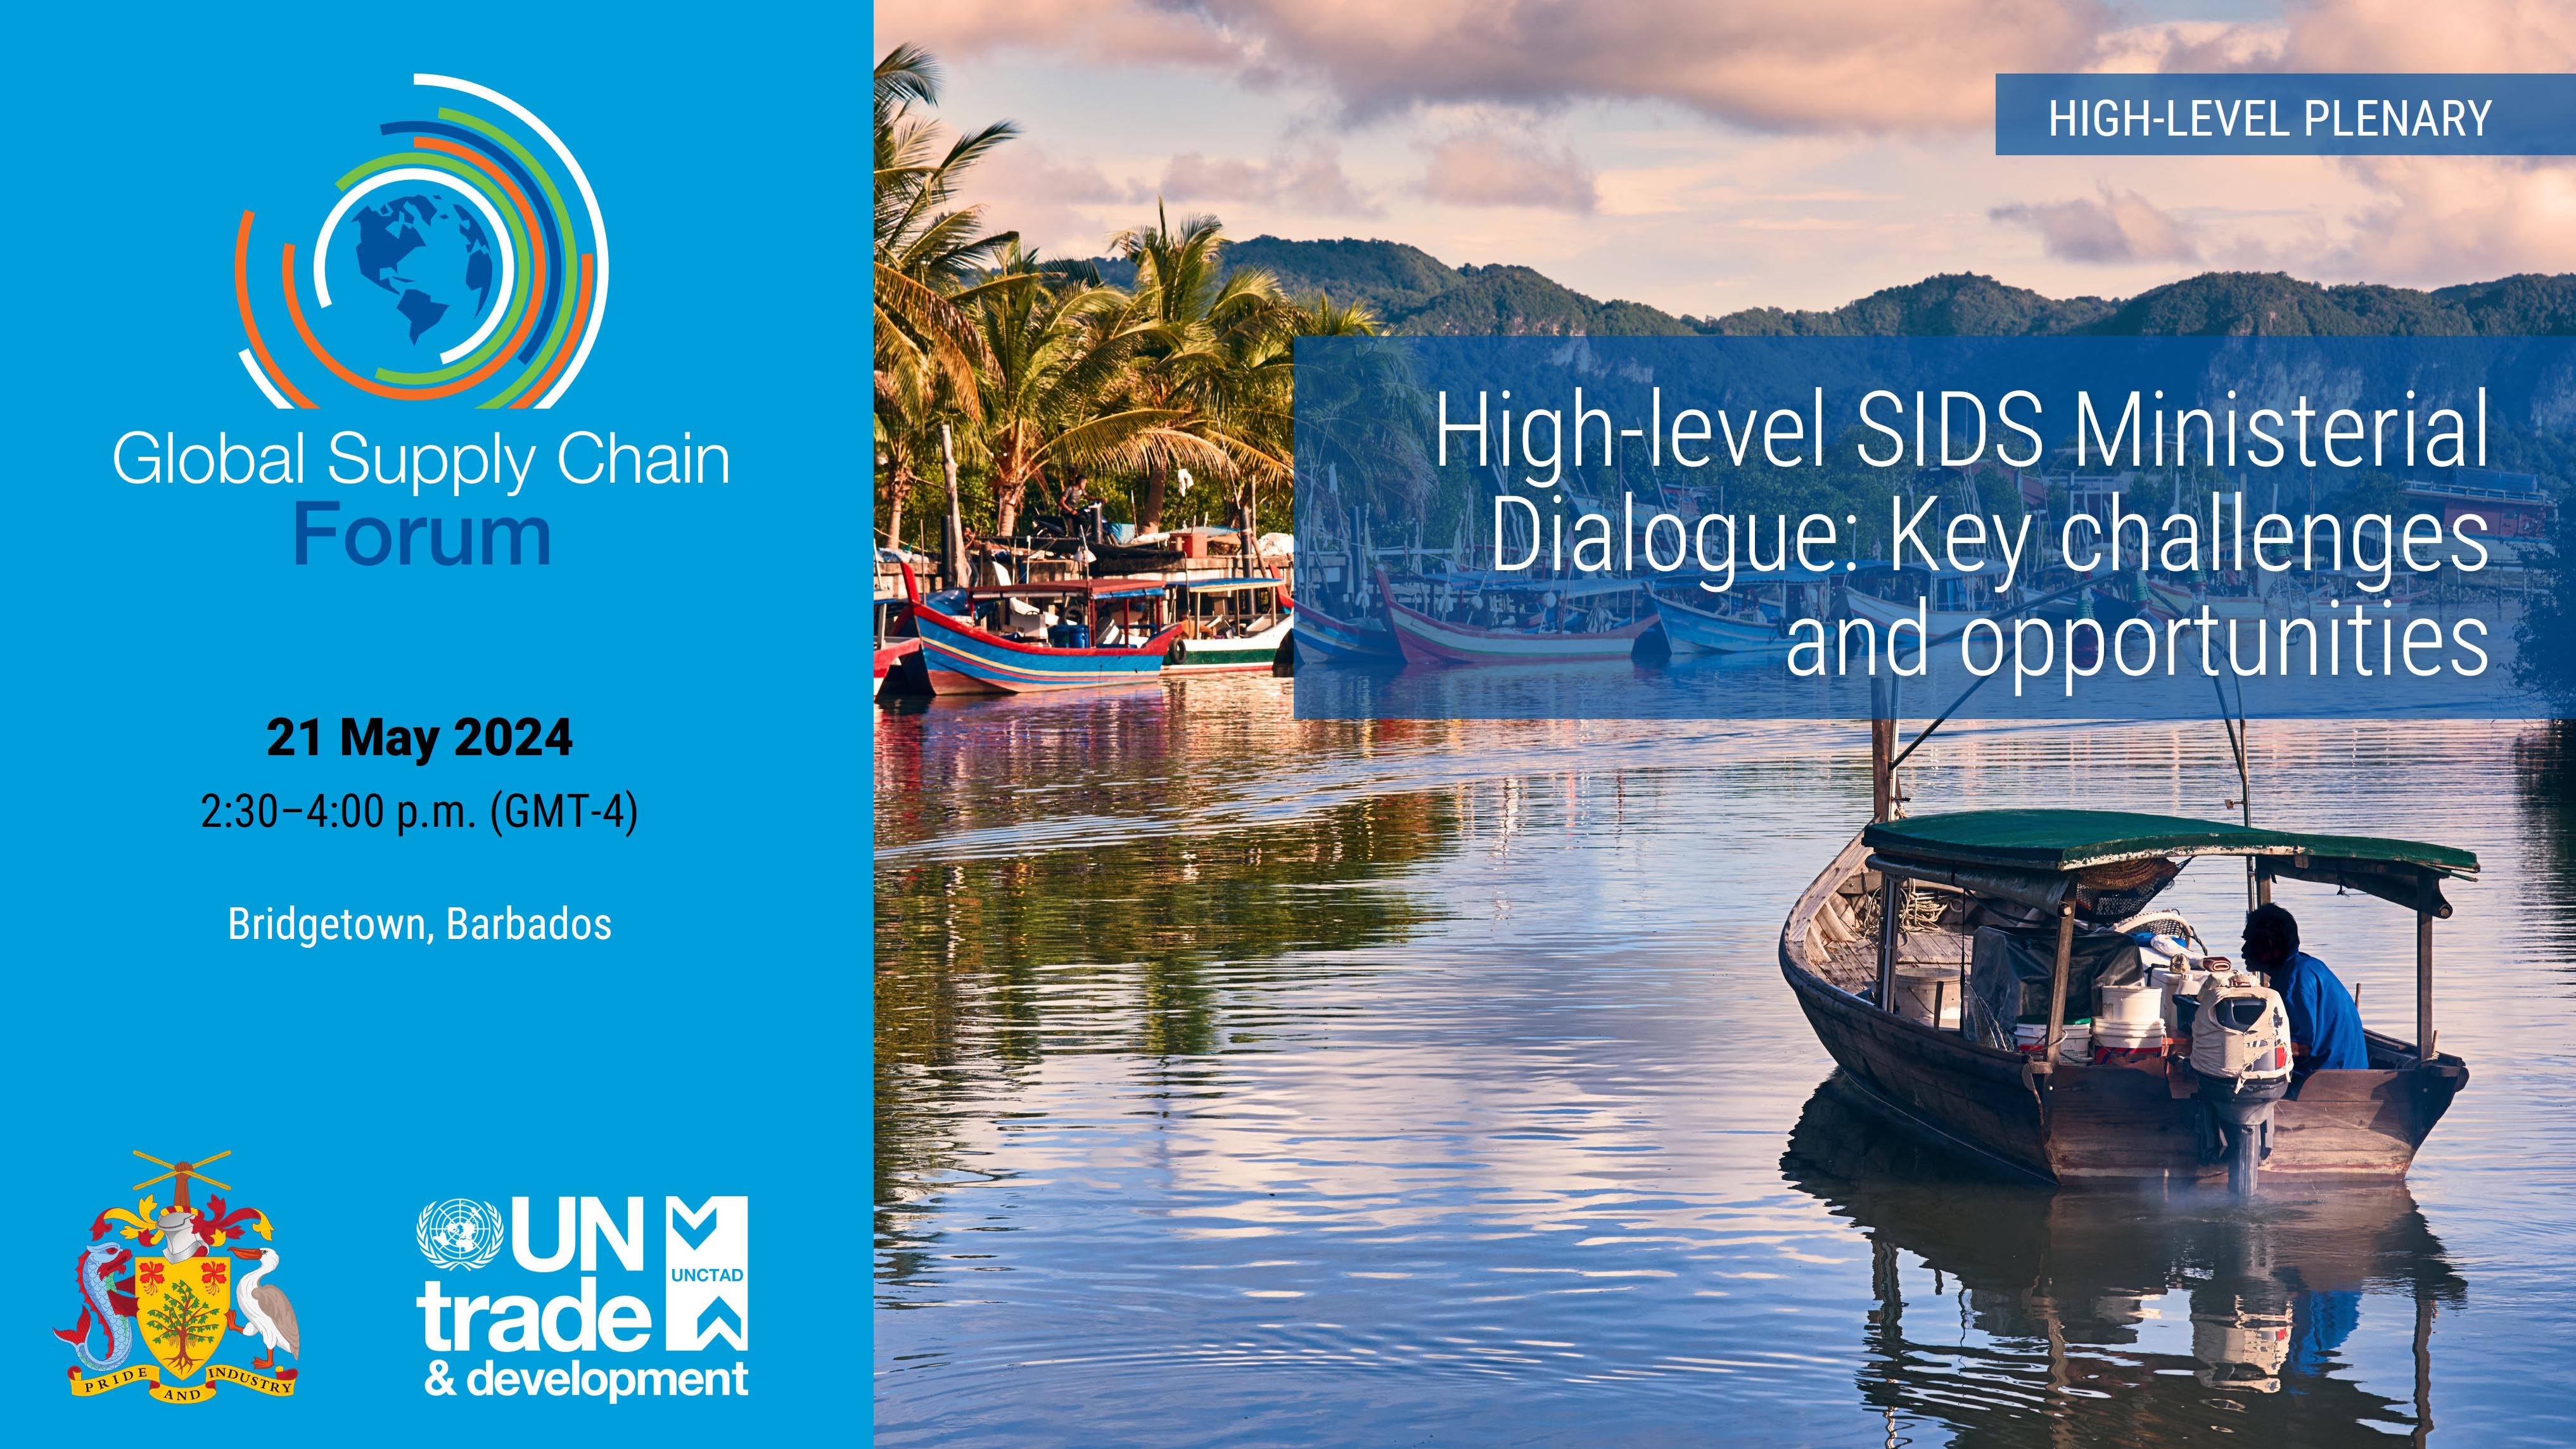 High-level SIDS Ministerial Dialogue: Key challenges and opportunities 